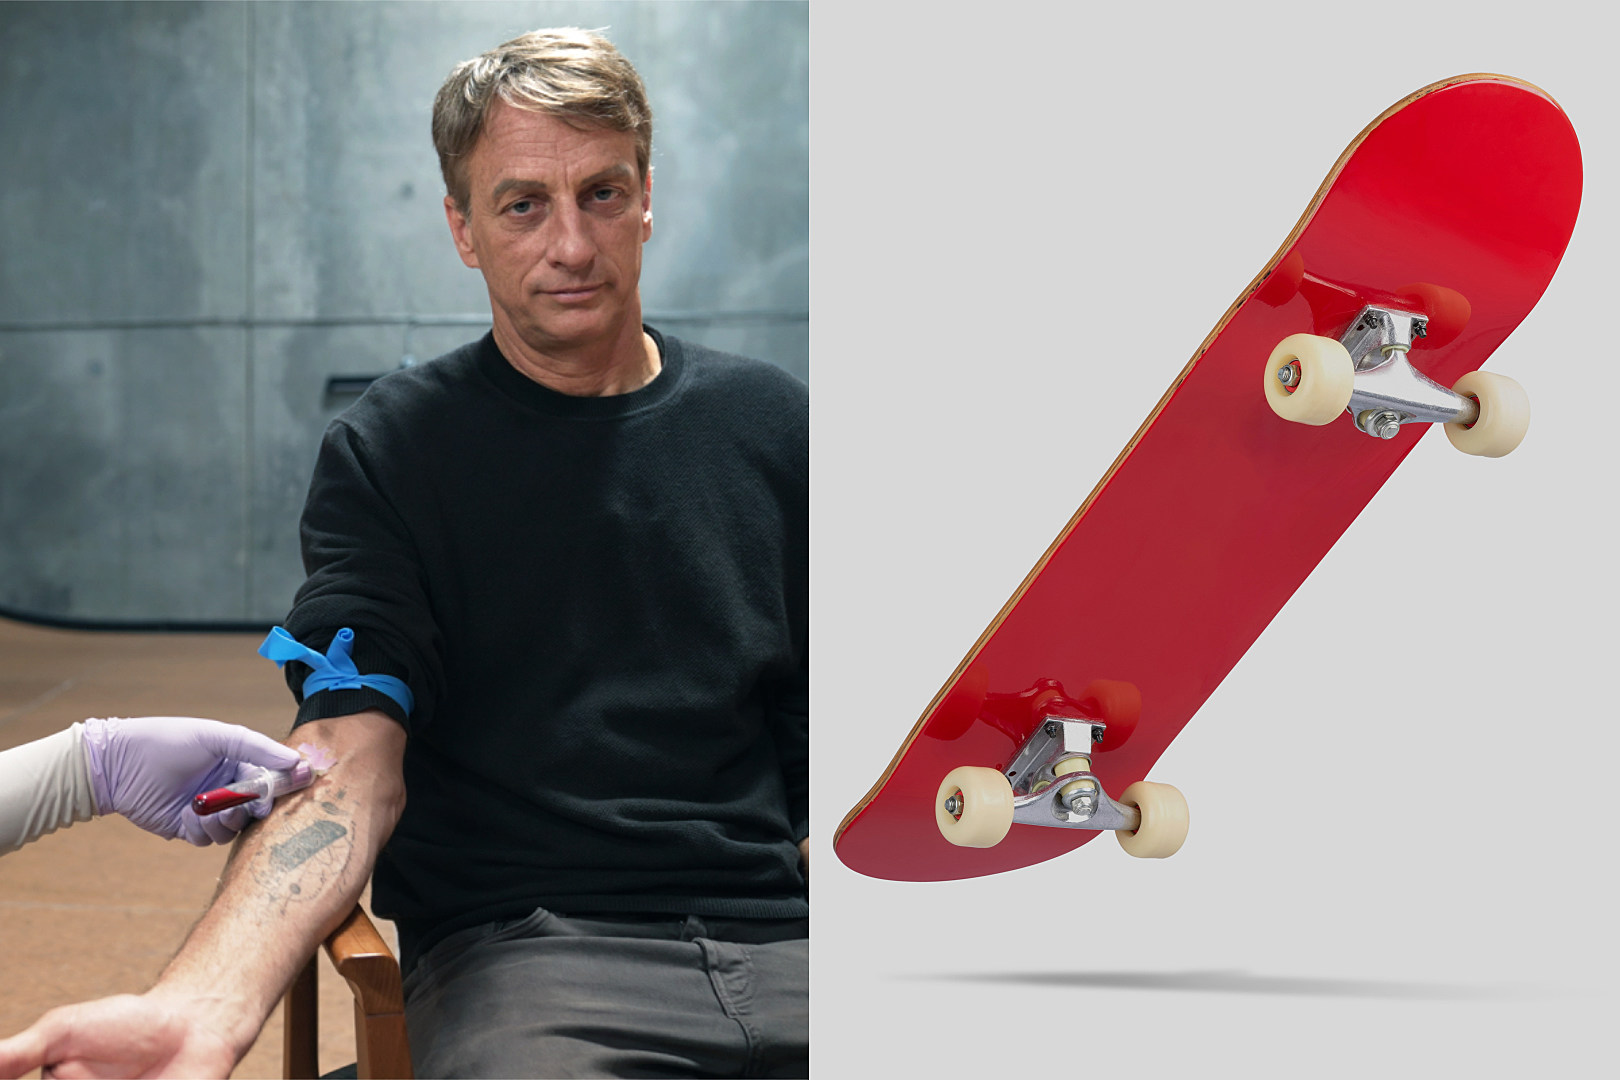 Tony Hawk Shares Update One Year After 'Traumatic Injury